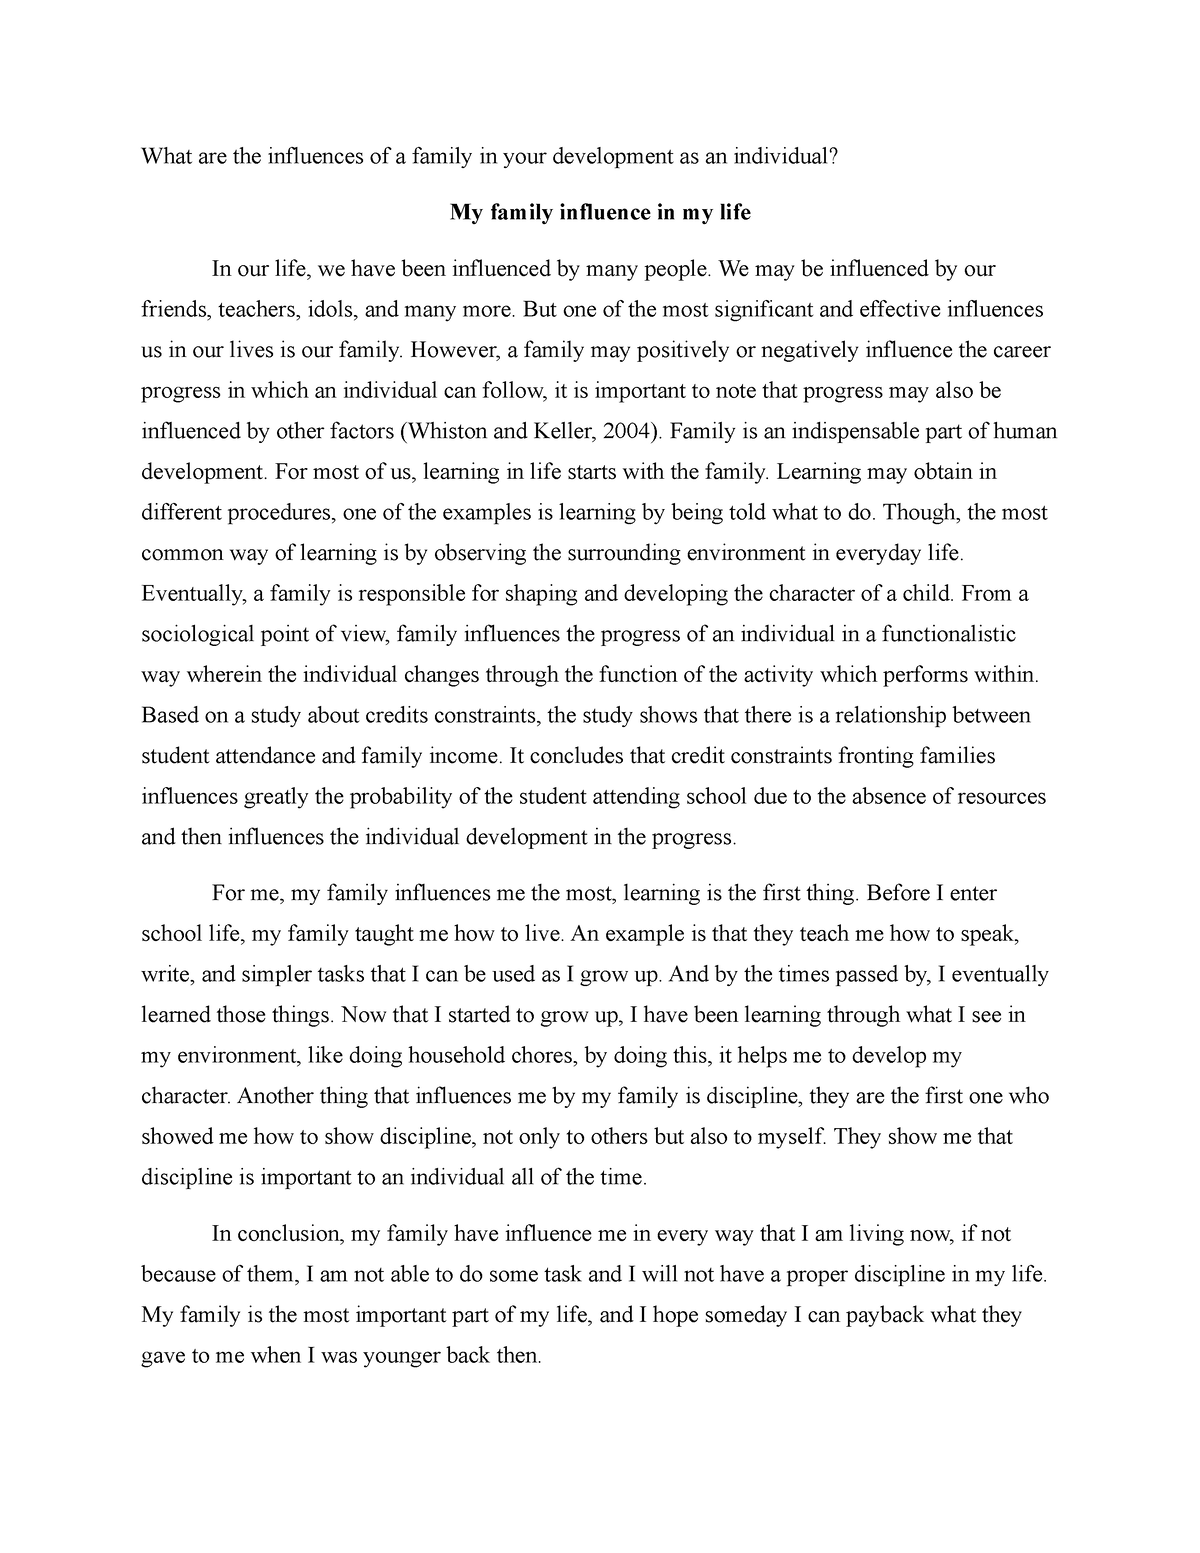 how friends influence your life essay